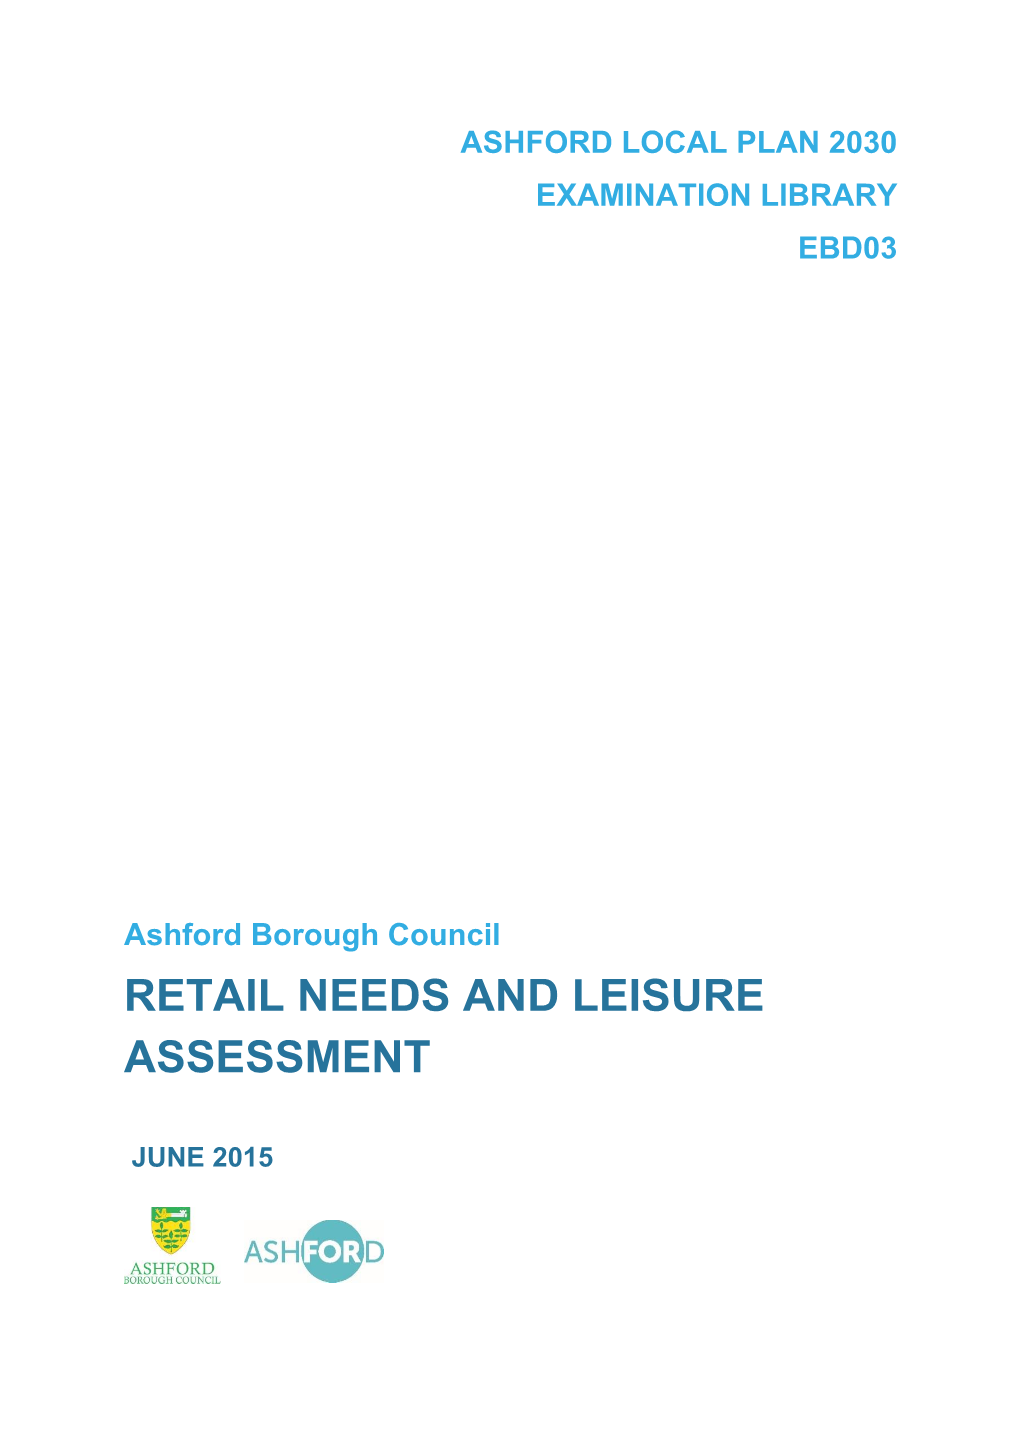 Retail Needs and Leisure Assessment